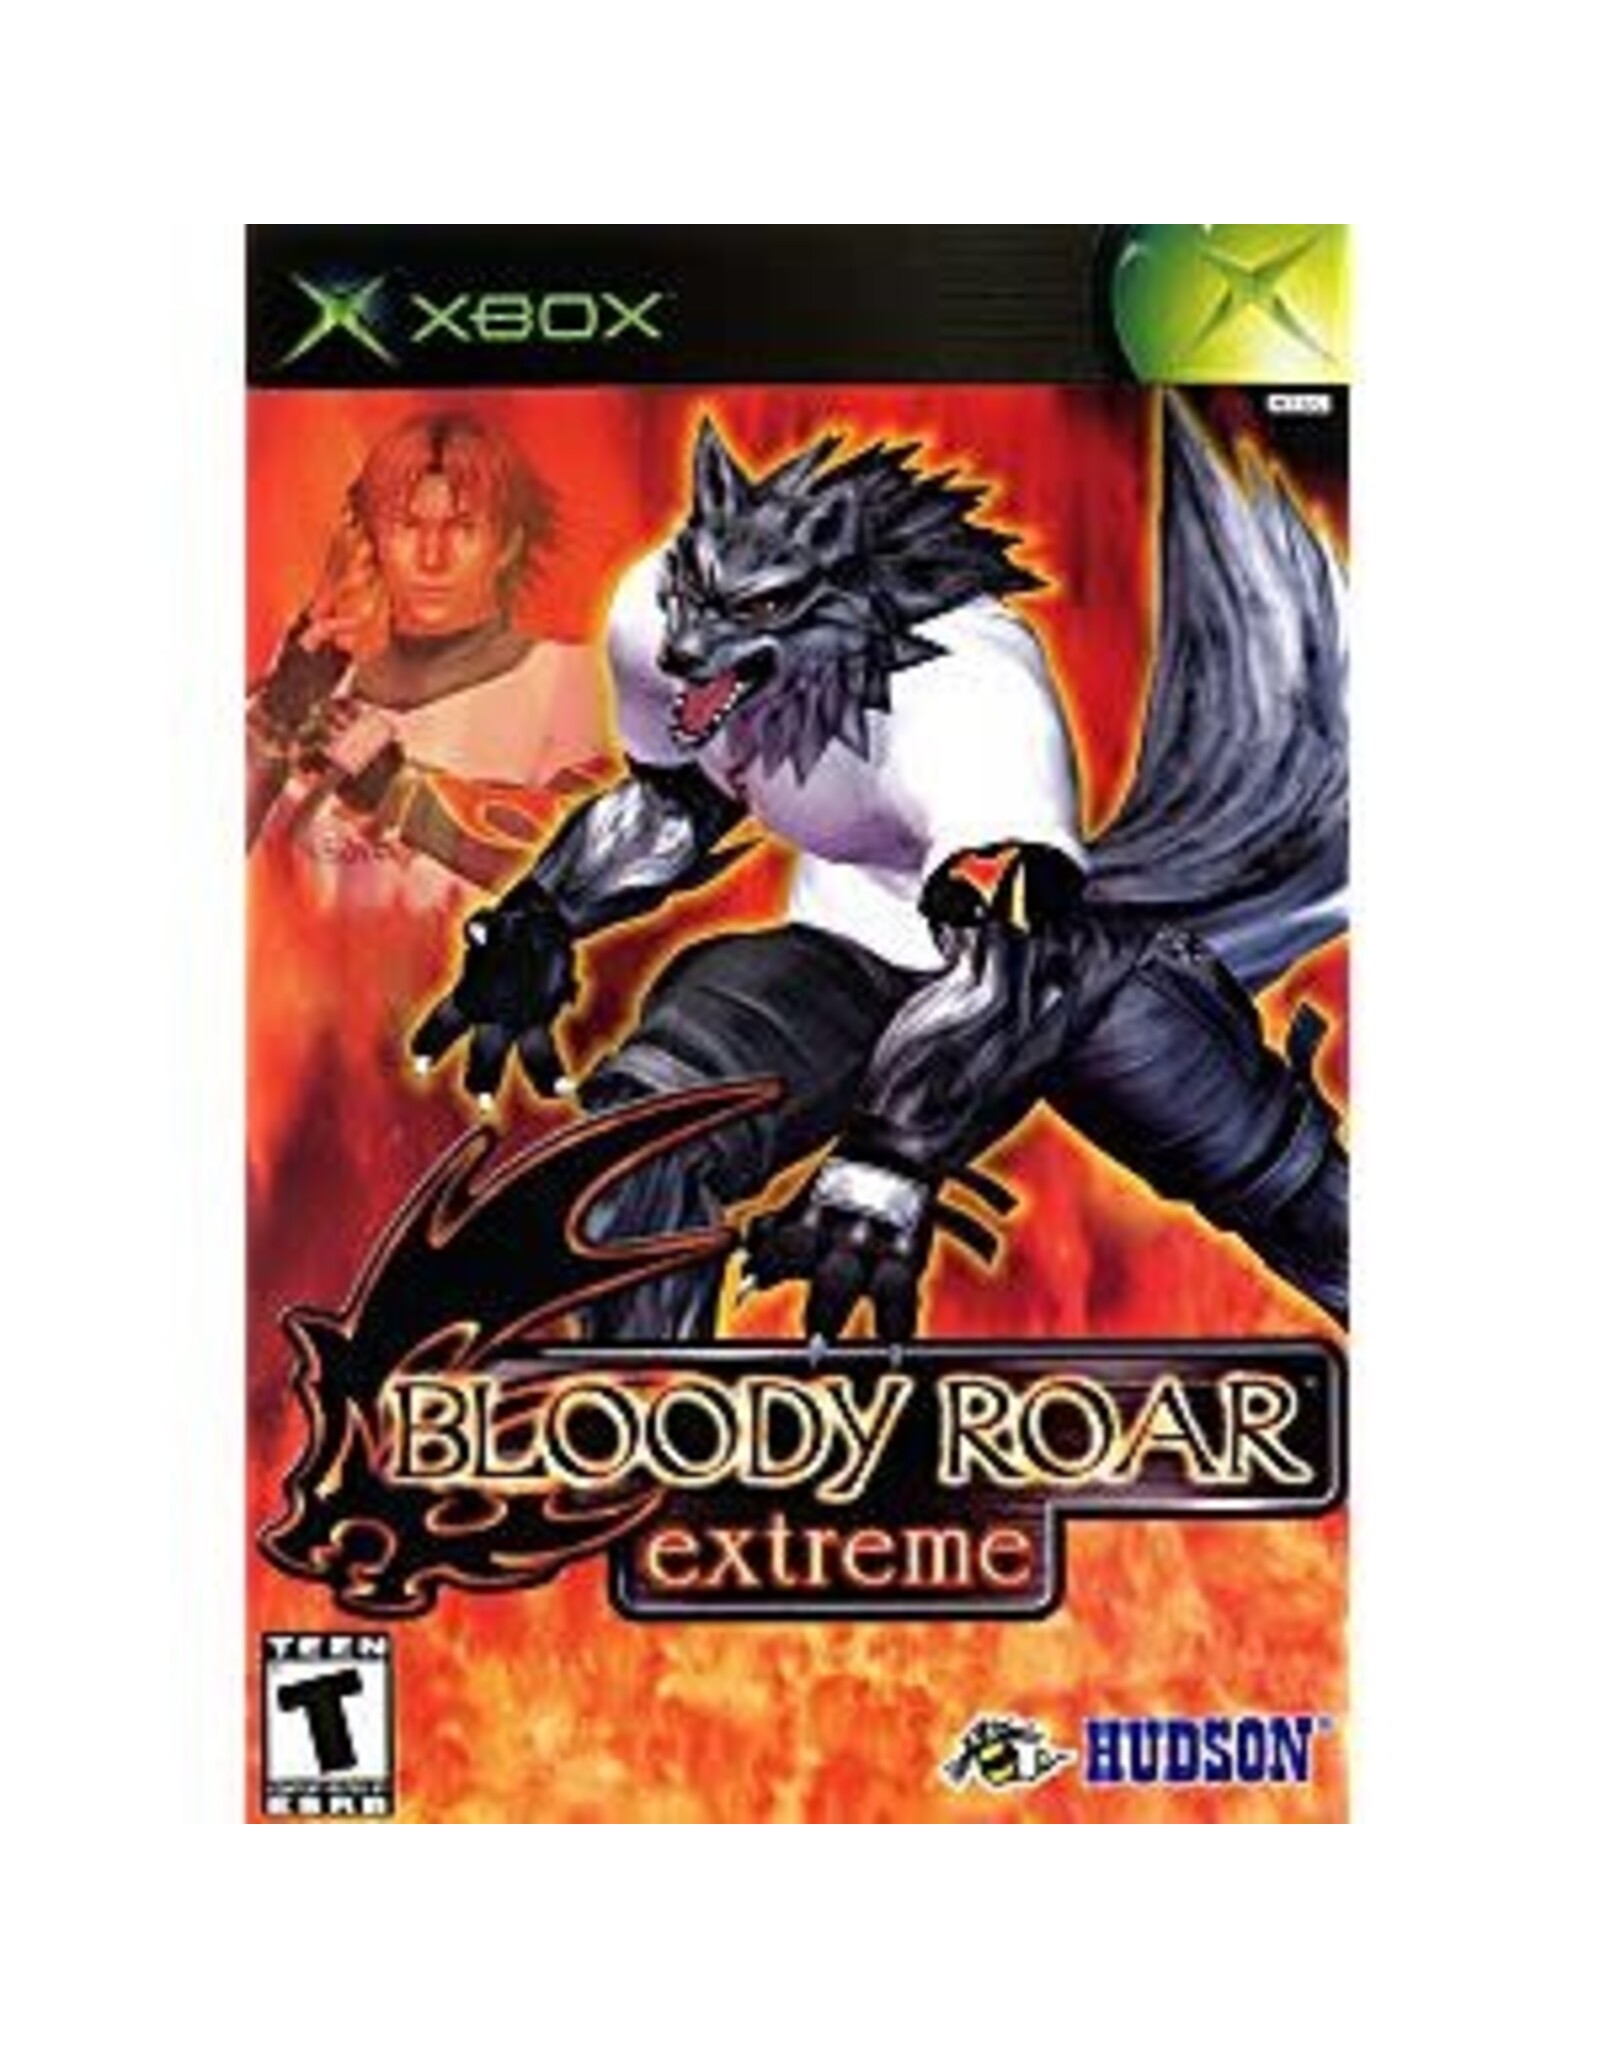 Xbox Bloody Roar Extreme (Used)